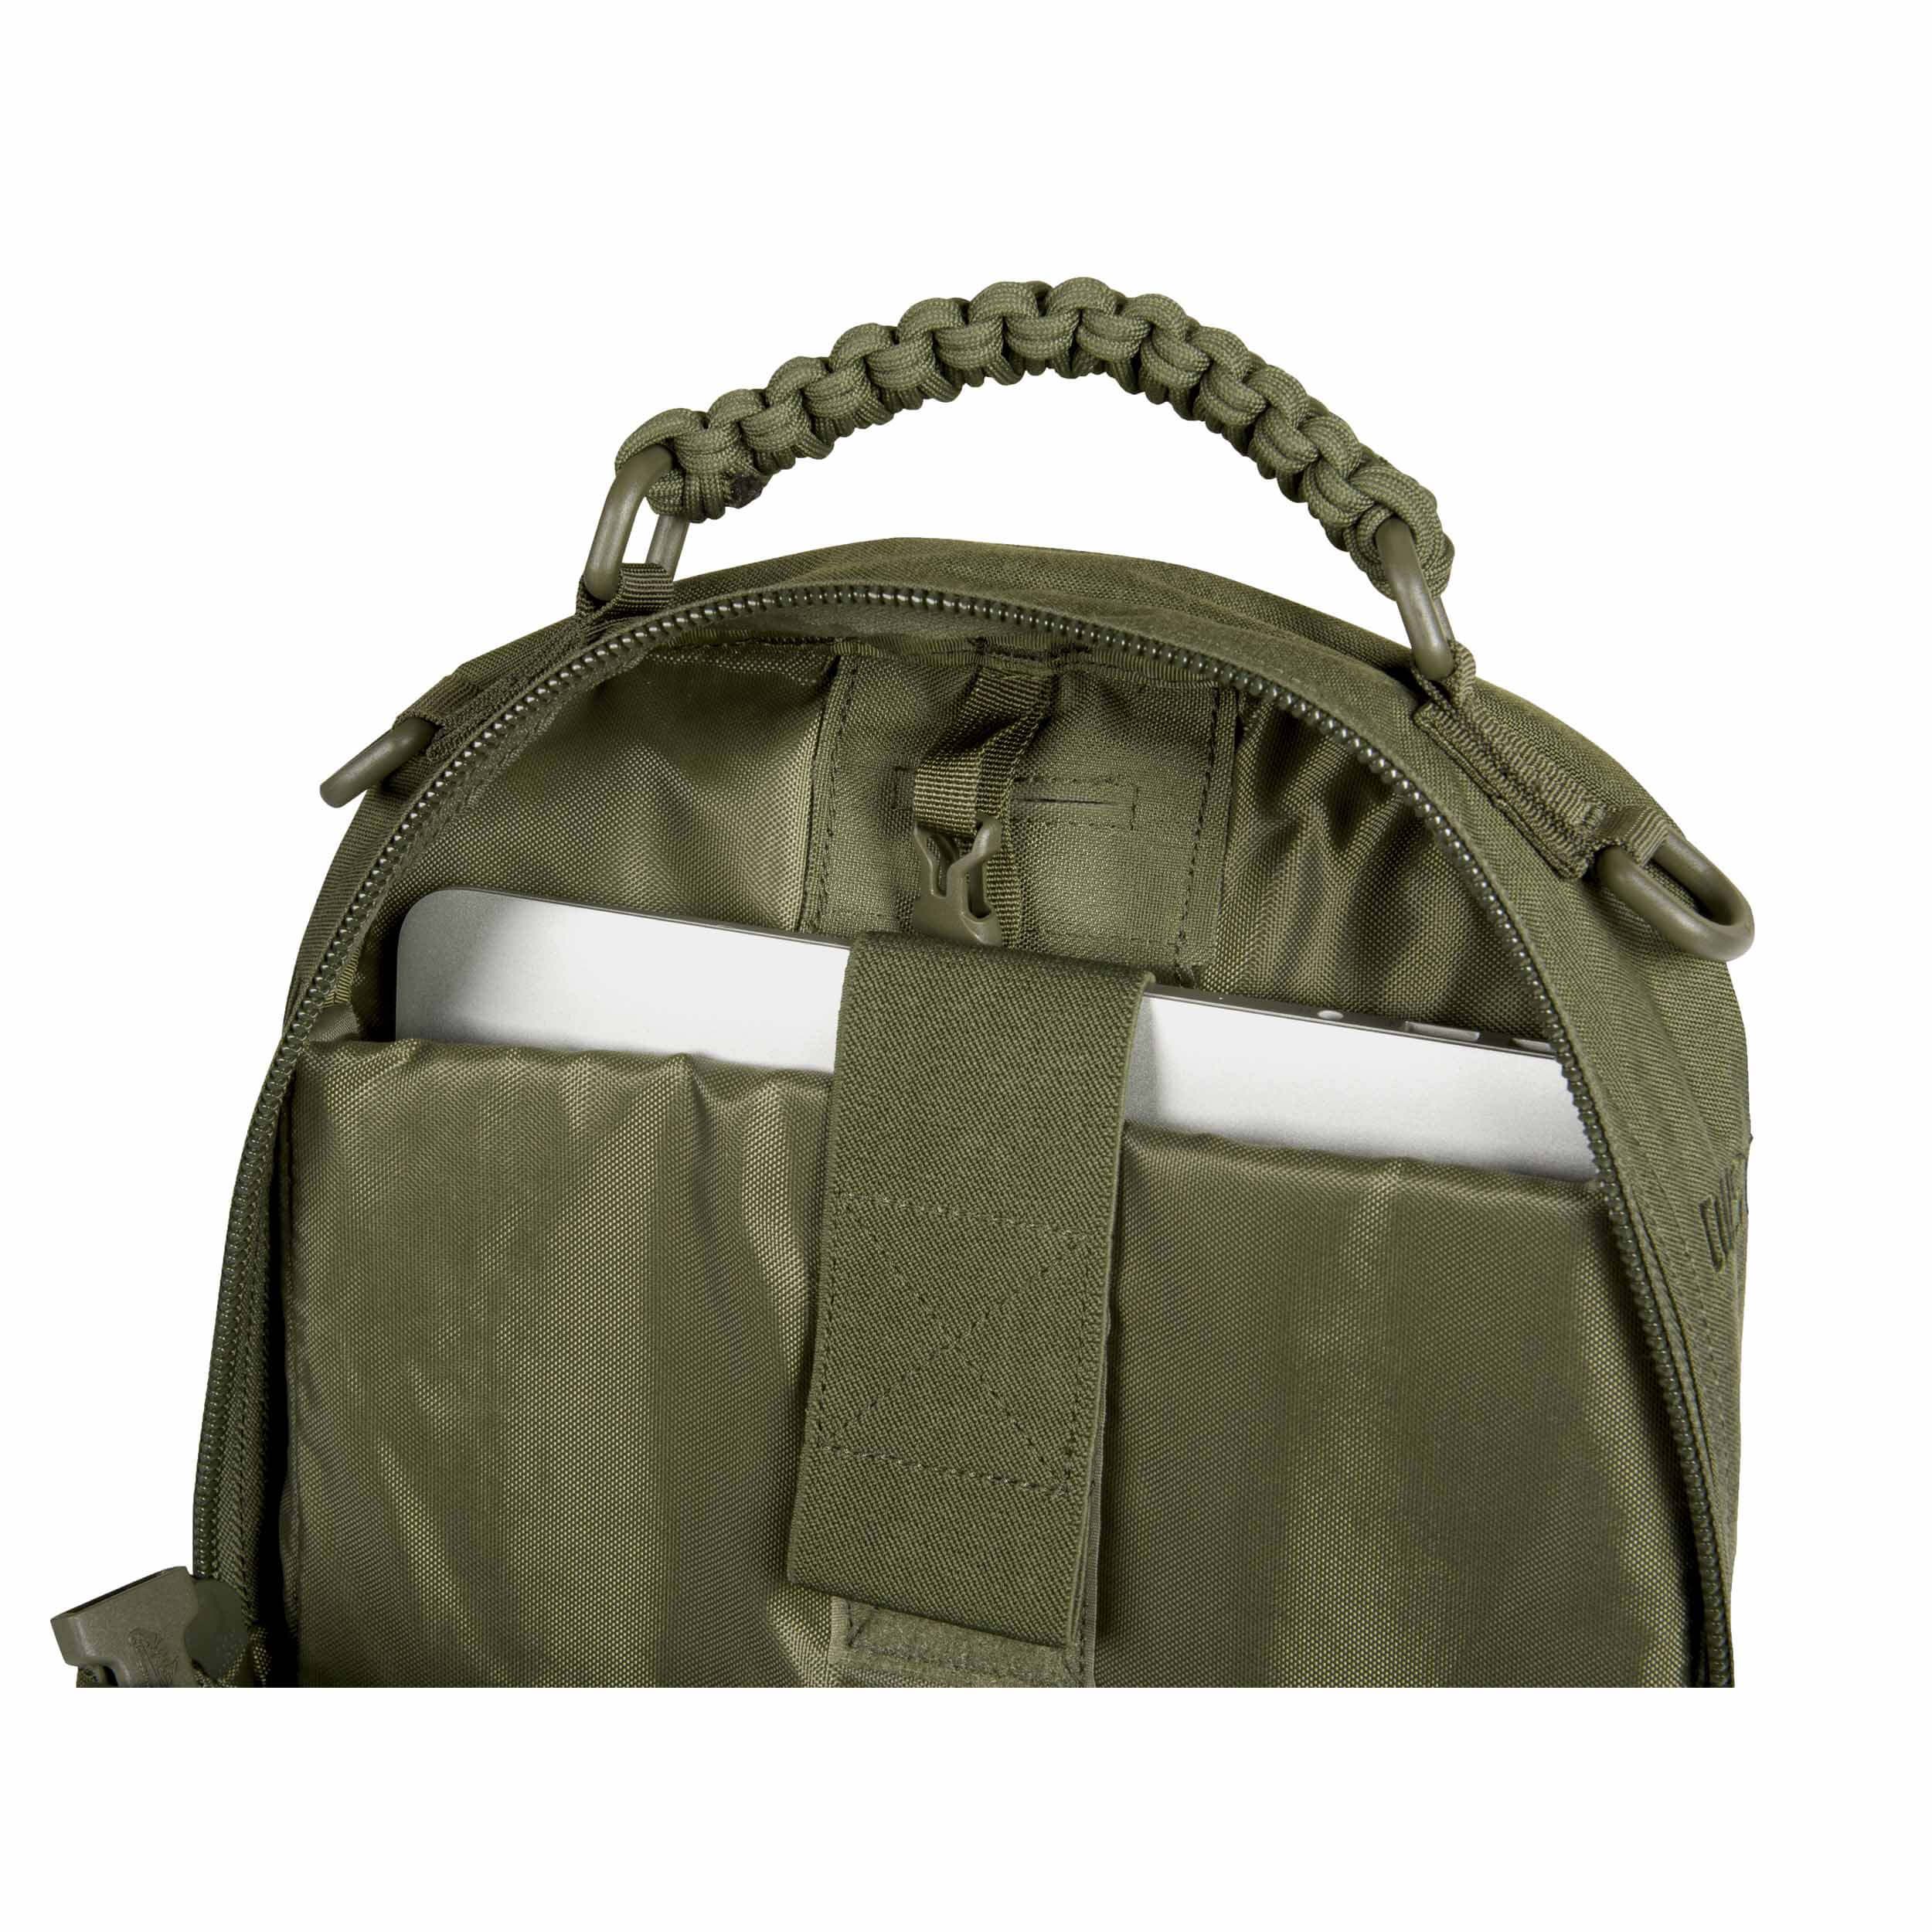 Direct Action DUST® MkII Backpack - Cordura® - Coyote Brown